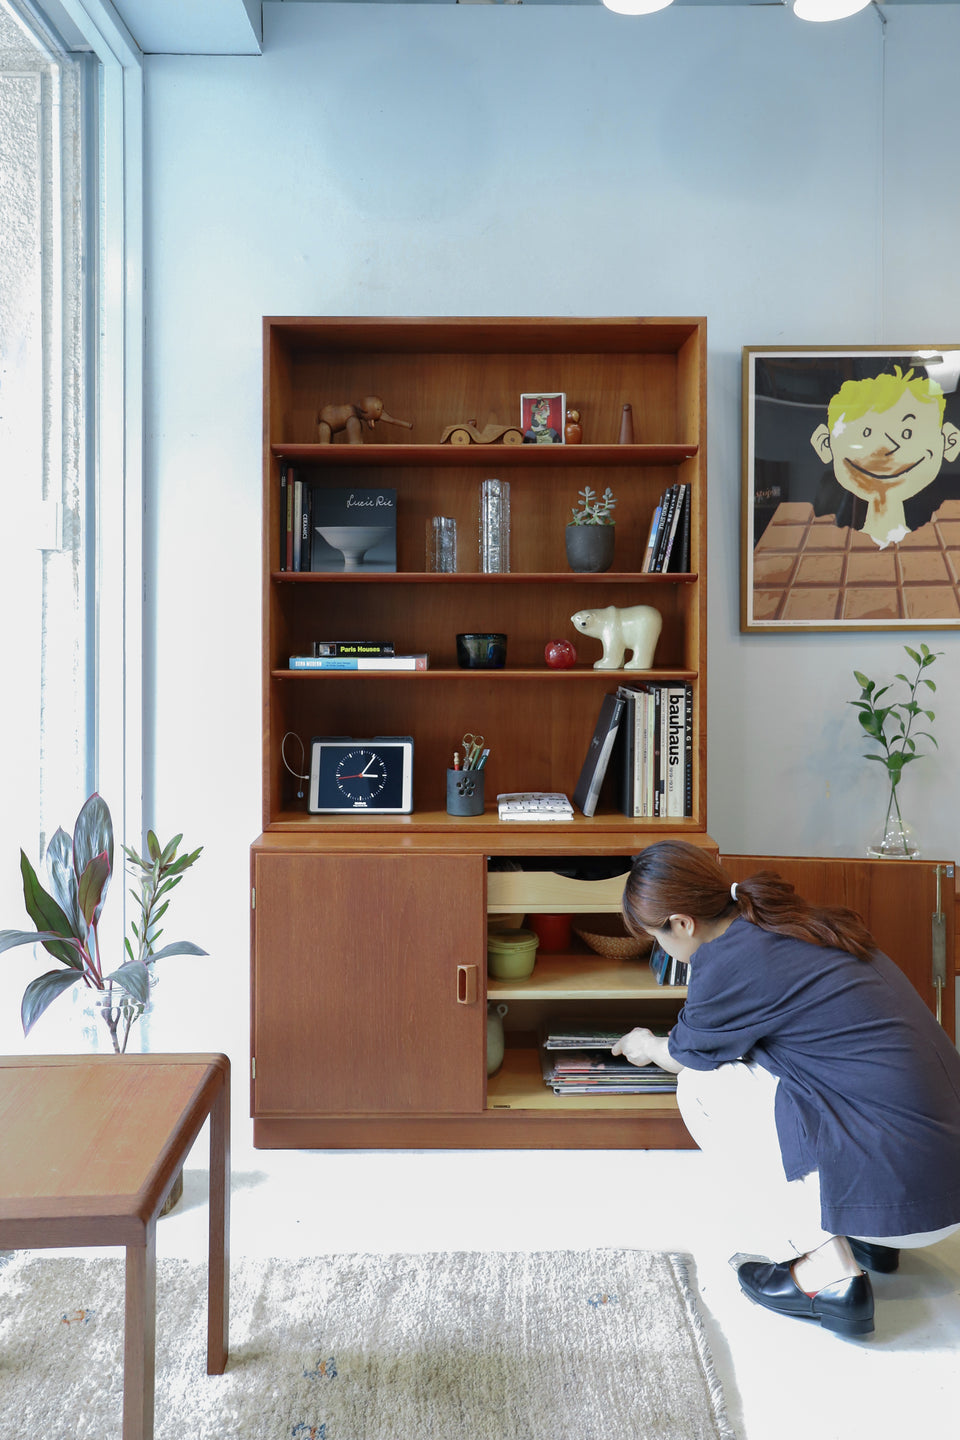 Børge Mogensen Book Case Cabinet Søborg Møbler/ボーエ・モーエンセン ブックケース キャビネット ソボーモブラー デンマーク 北欧ヴィンテージ 収納家具